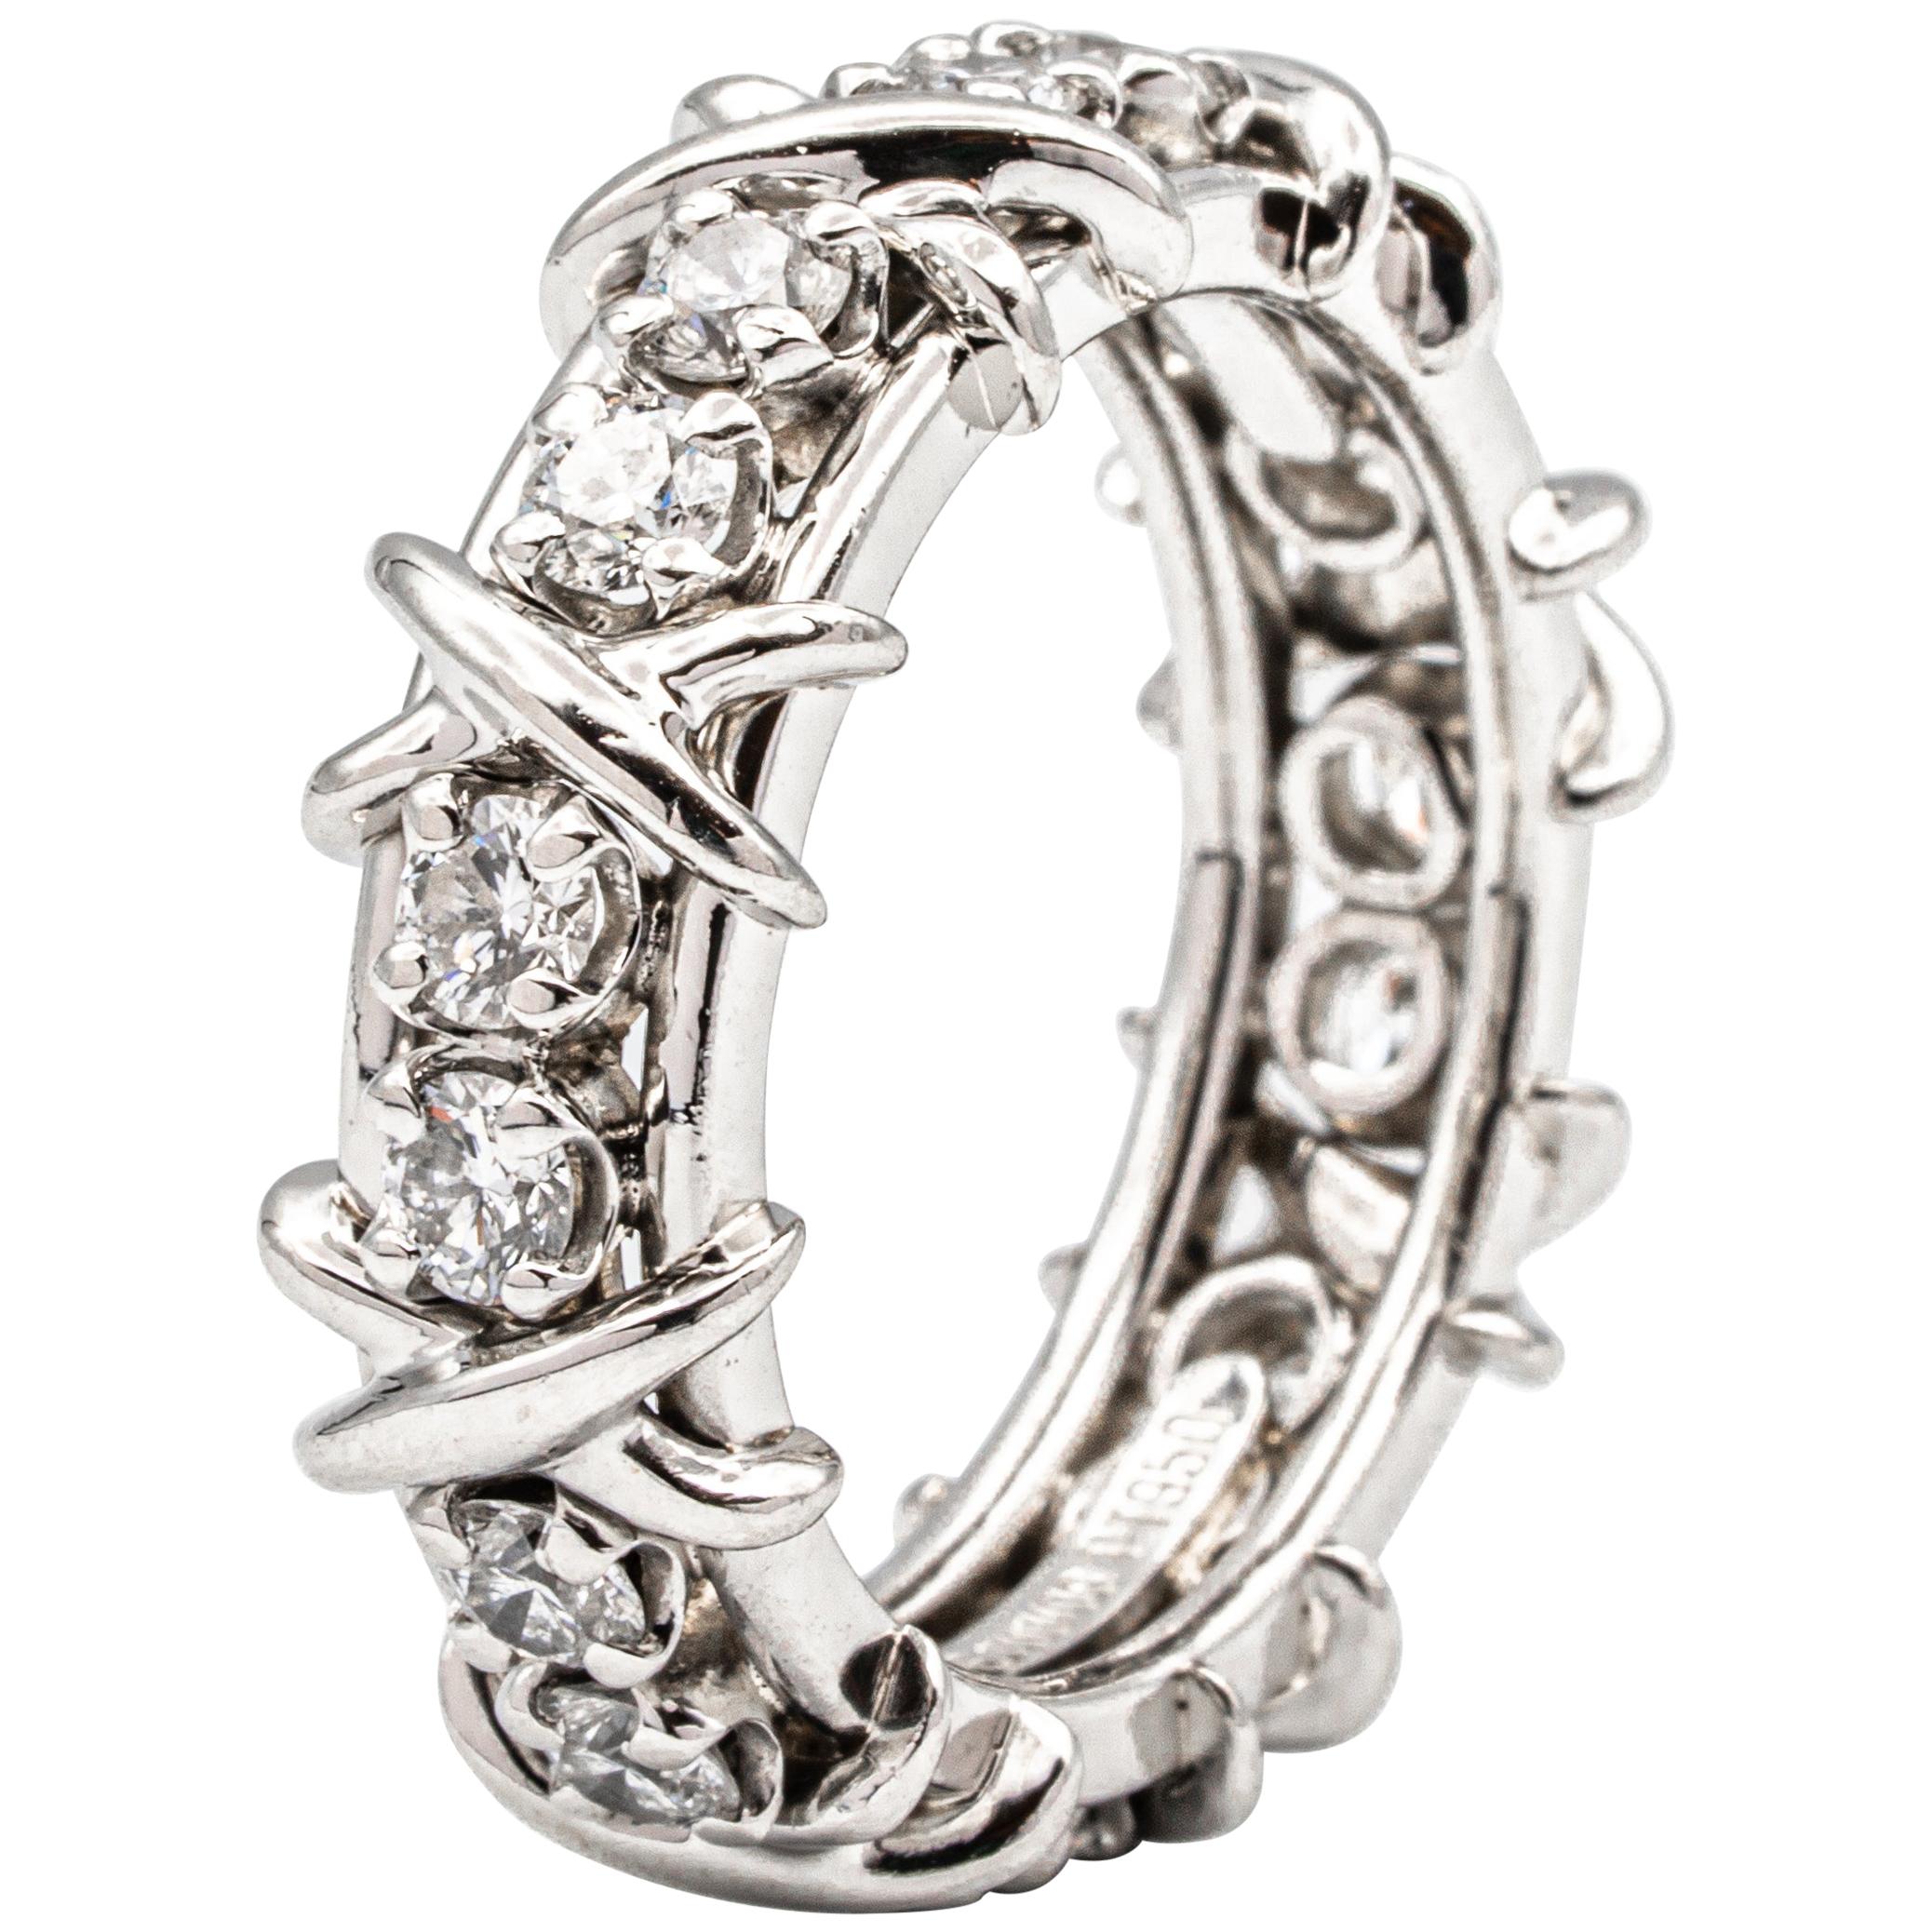 Jean Schlumberger for Tiffany & Co. 16 Stone Ring with Diamonds, Platinum